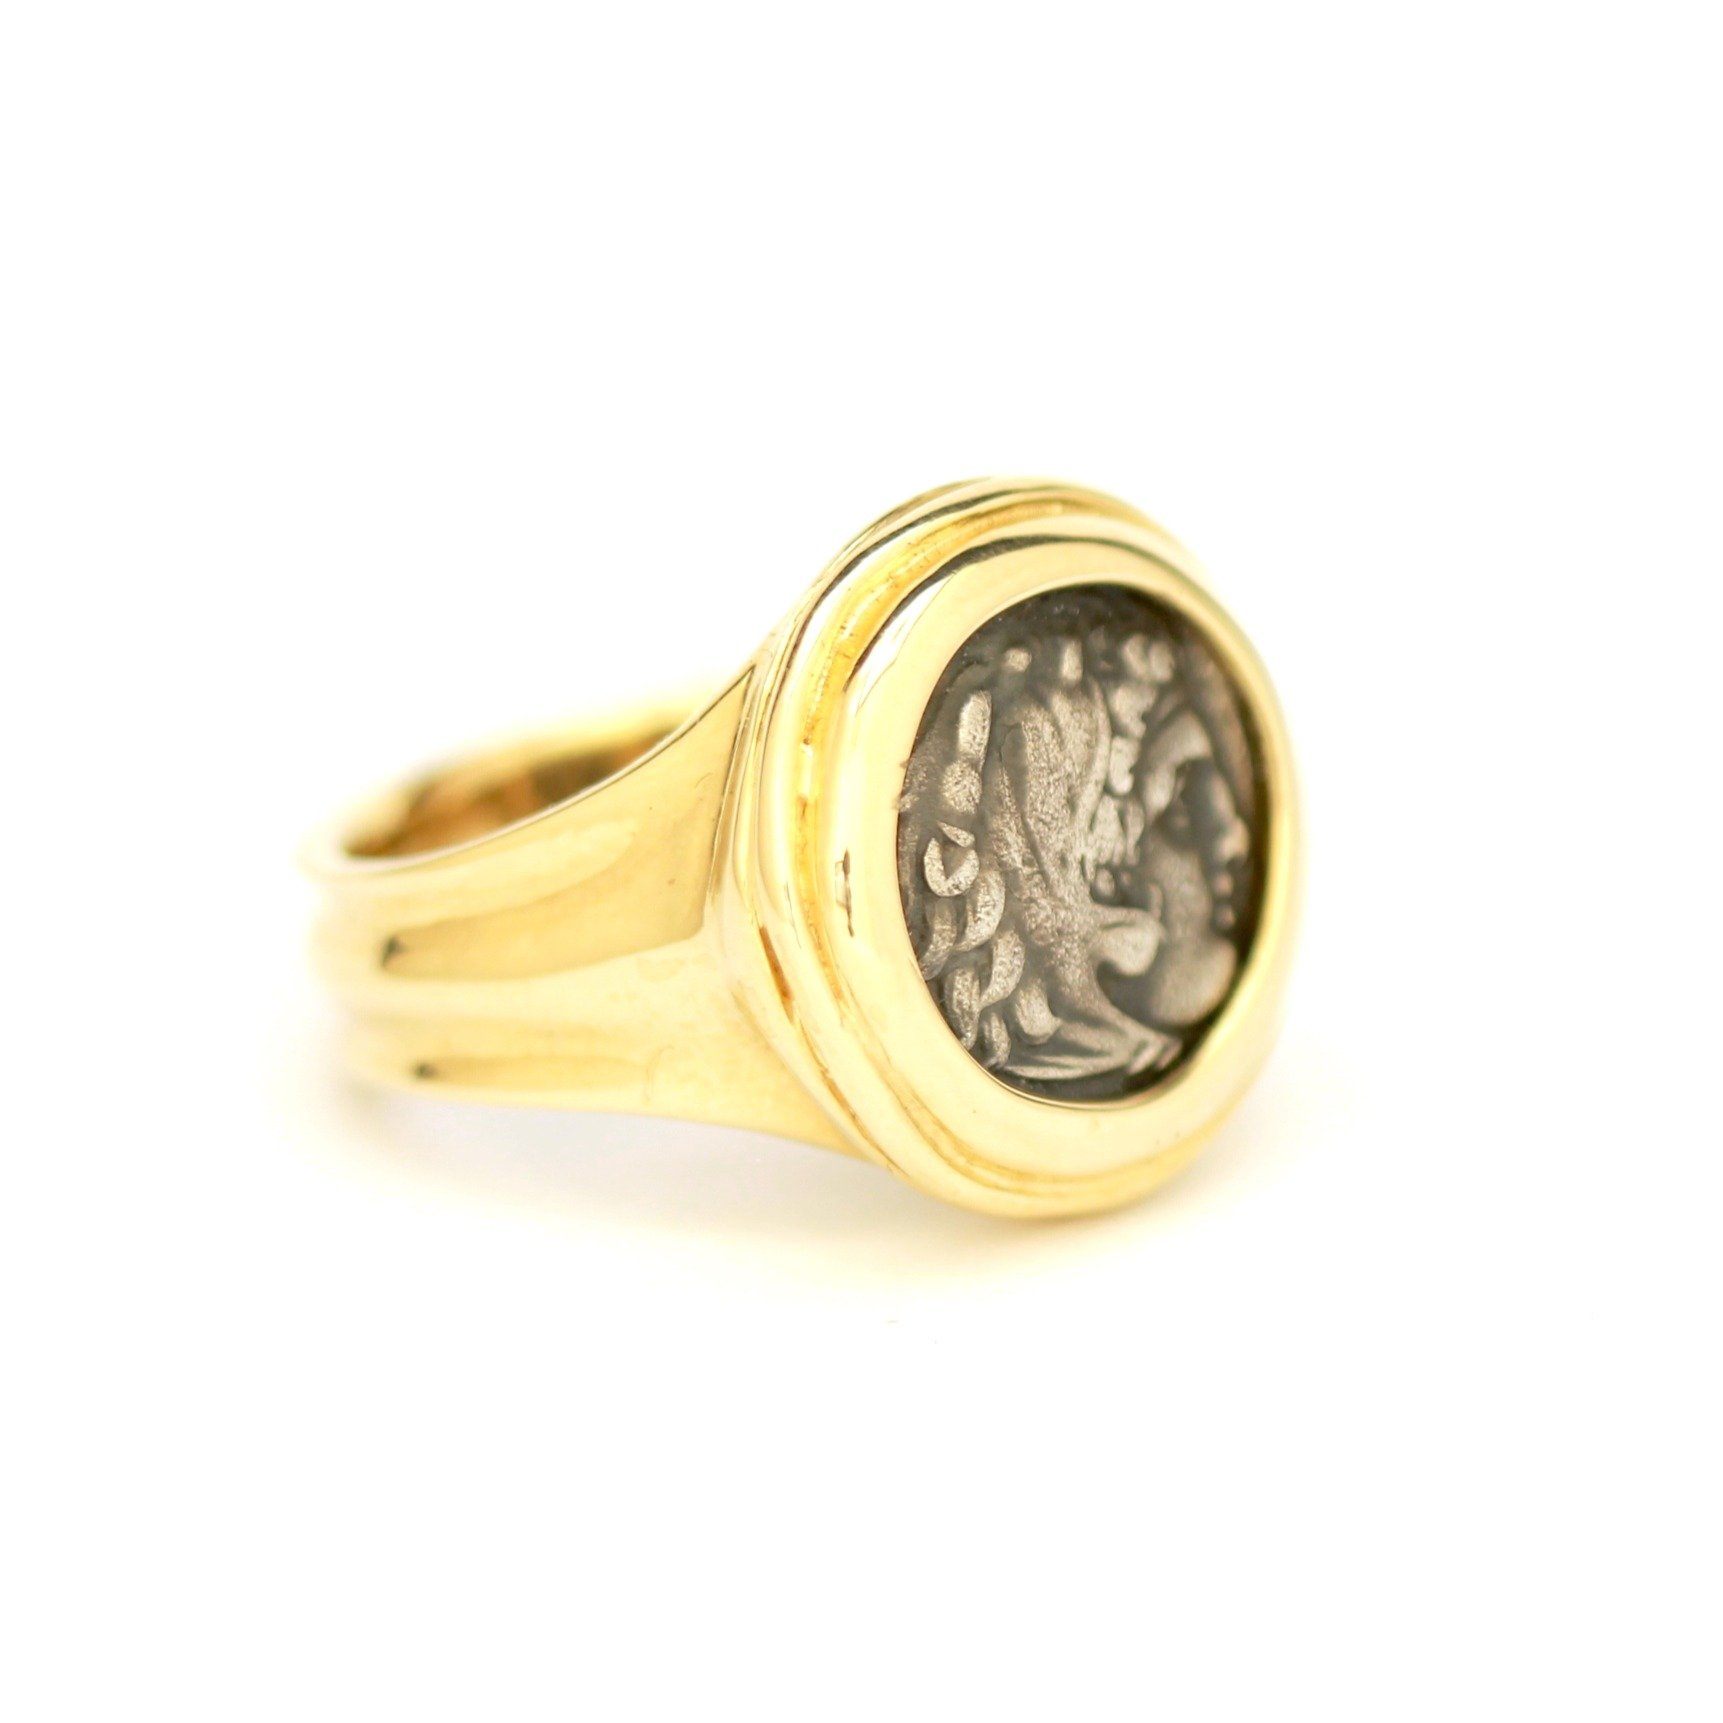 Alexander the Great Coin, Gold Ring, Genuine Ancient Coin w/ Certificate ID13084 - Erez Ancient Coin Jewelry 